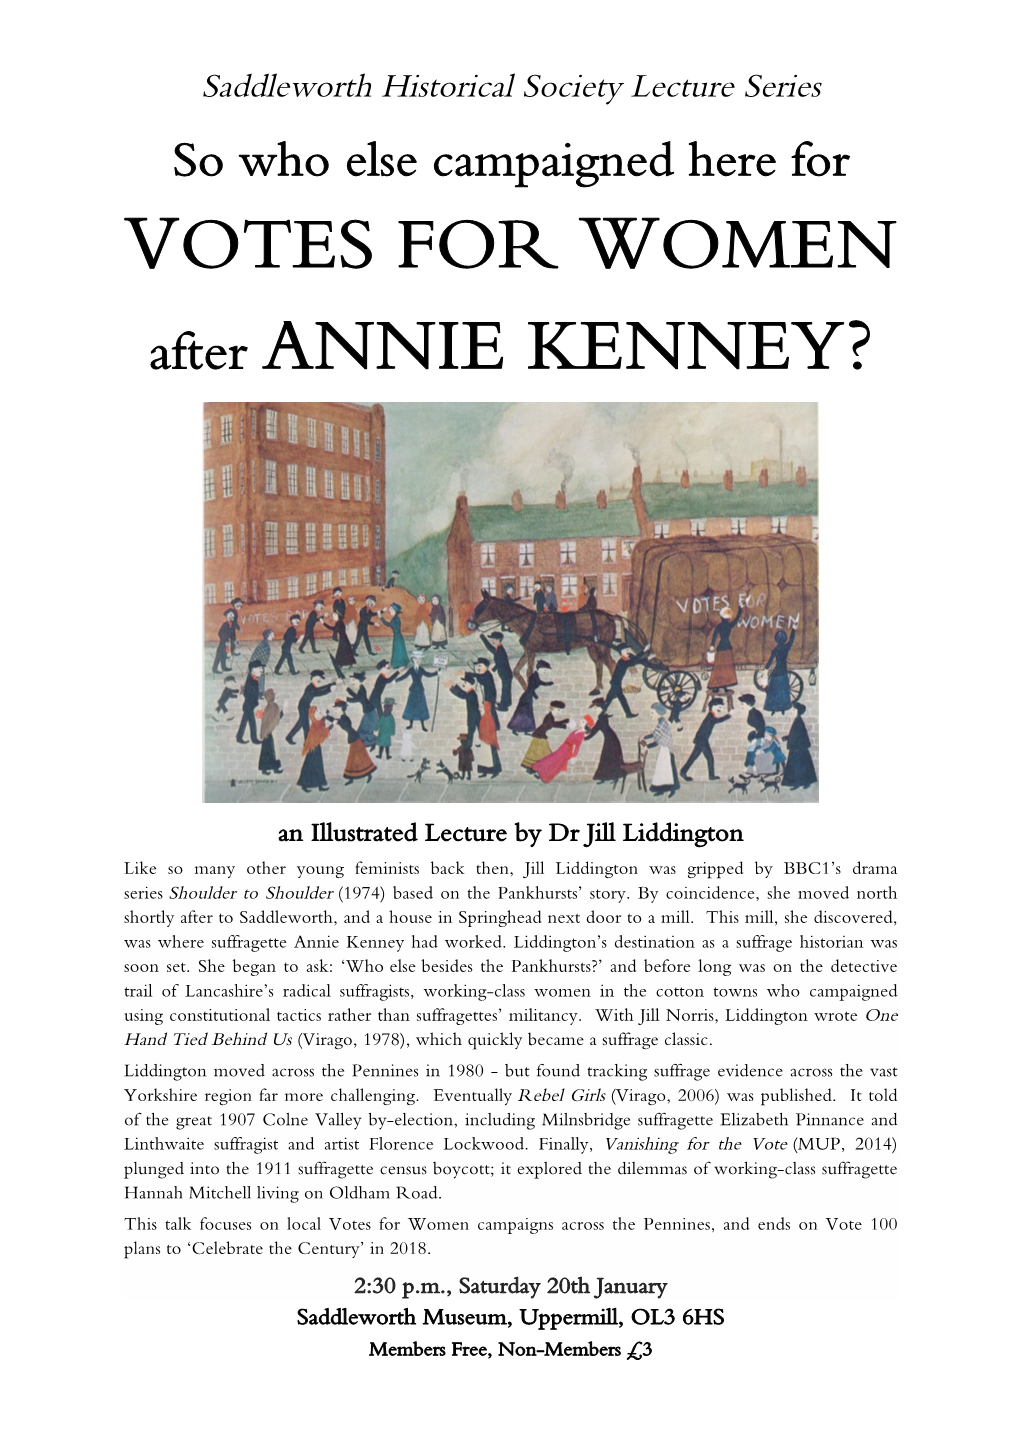 VOTES for WOMEN After ANNIE KENNEY?